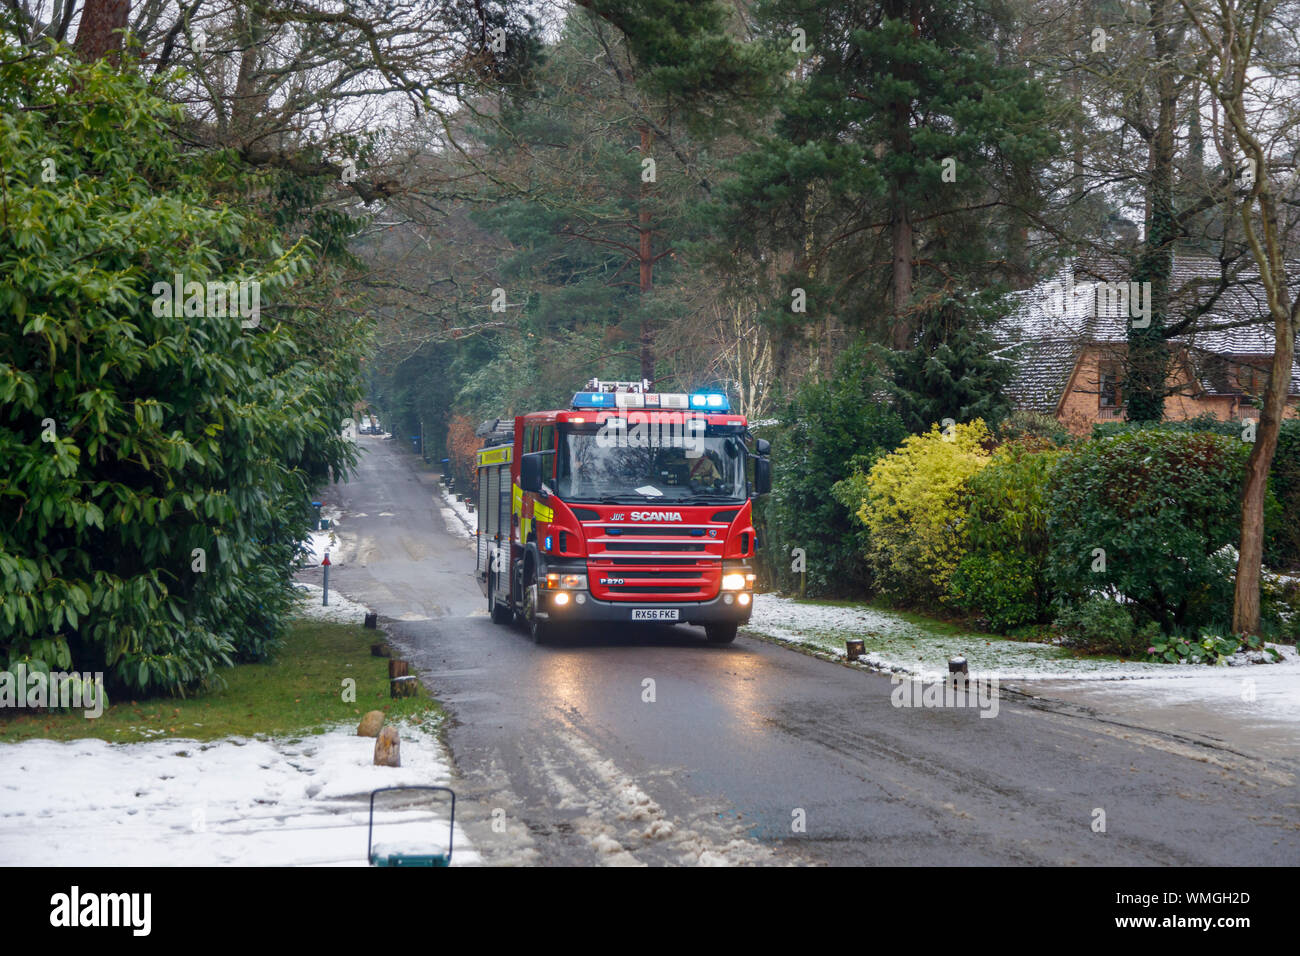 A red Scania P270 fire engine with flashing lights attends an emergency on a cold snowy morning in winter, Woking, Surrey, southeast England Stock Photo